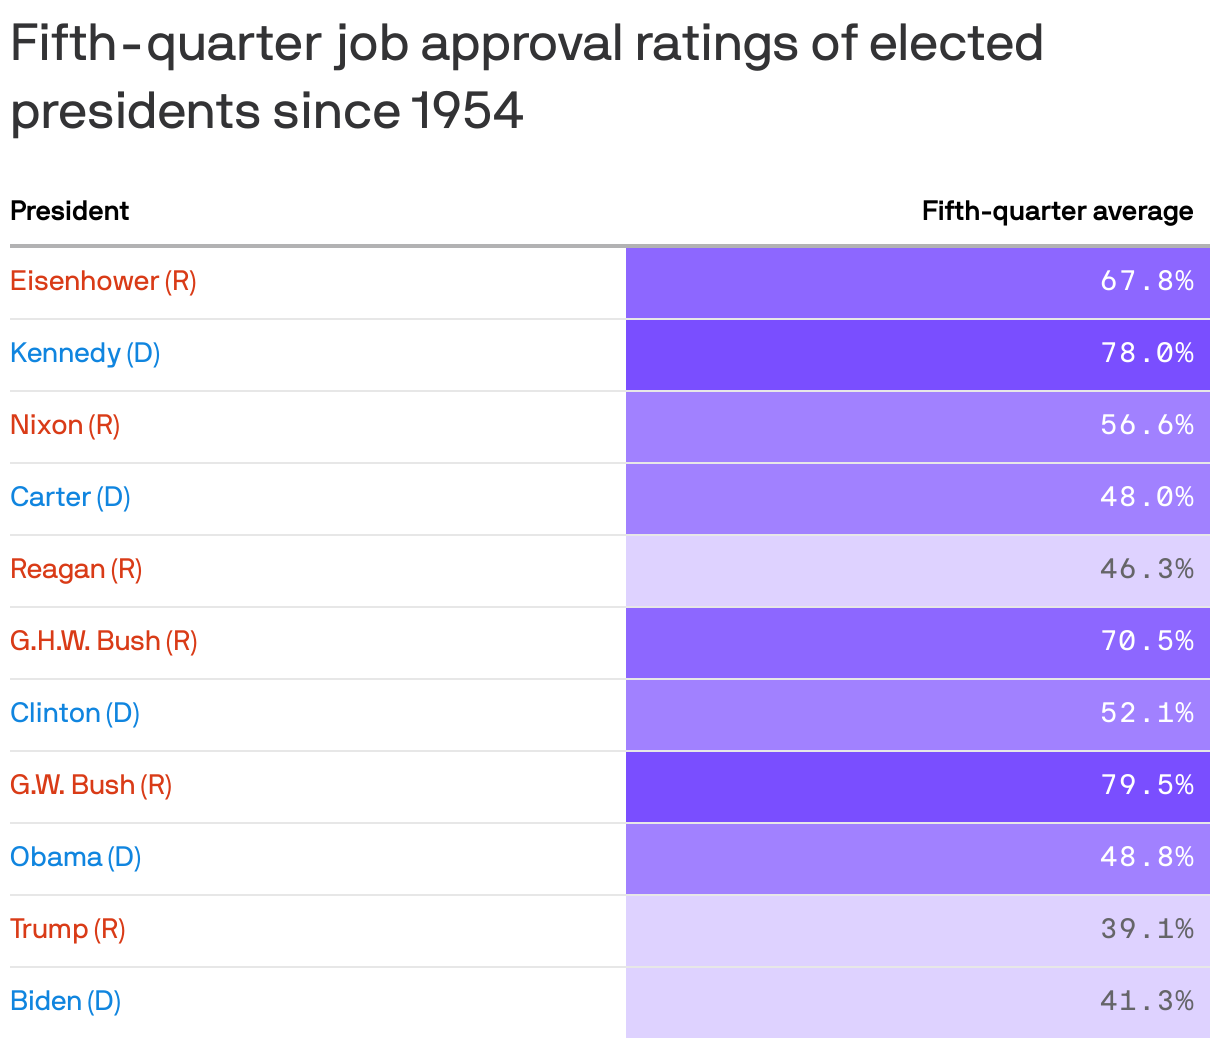 Fifth quarter job approval ratings of elected presidents since 1954